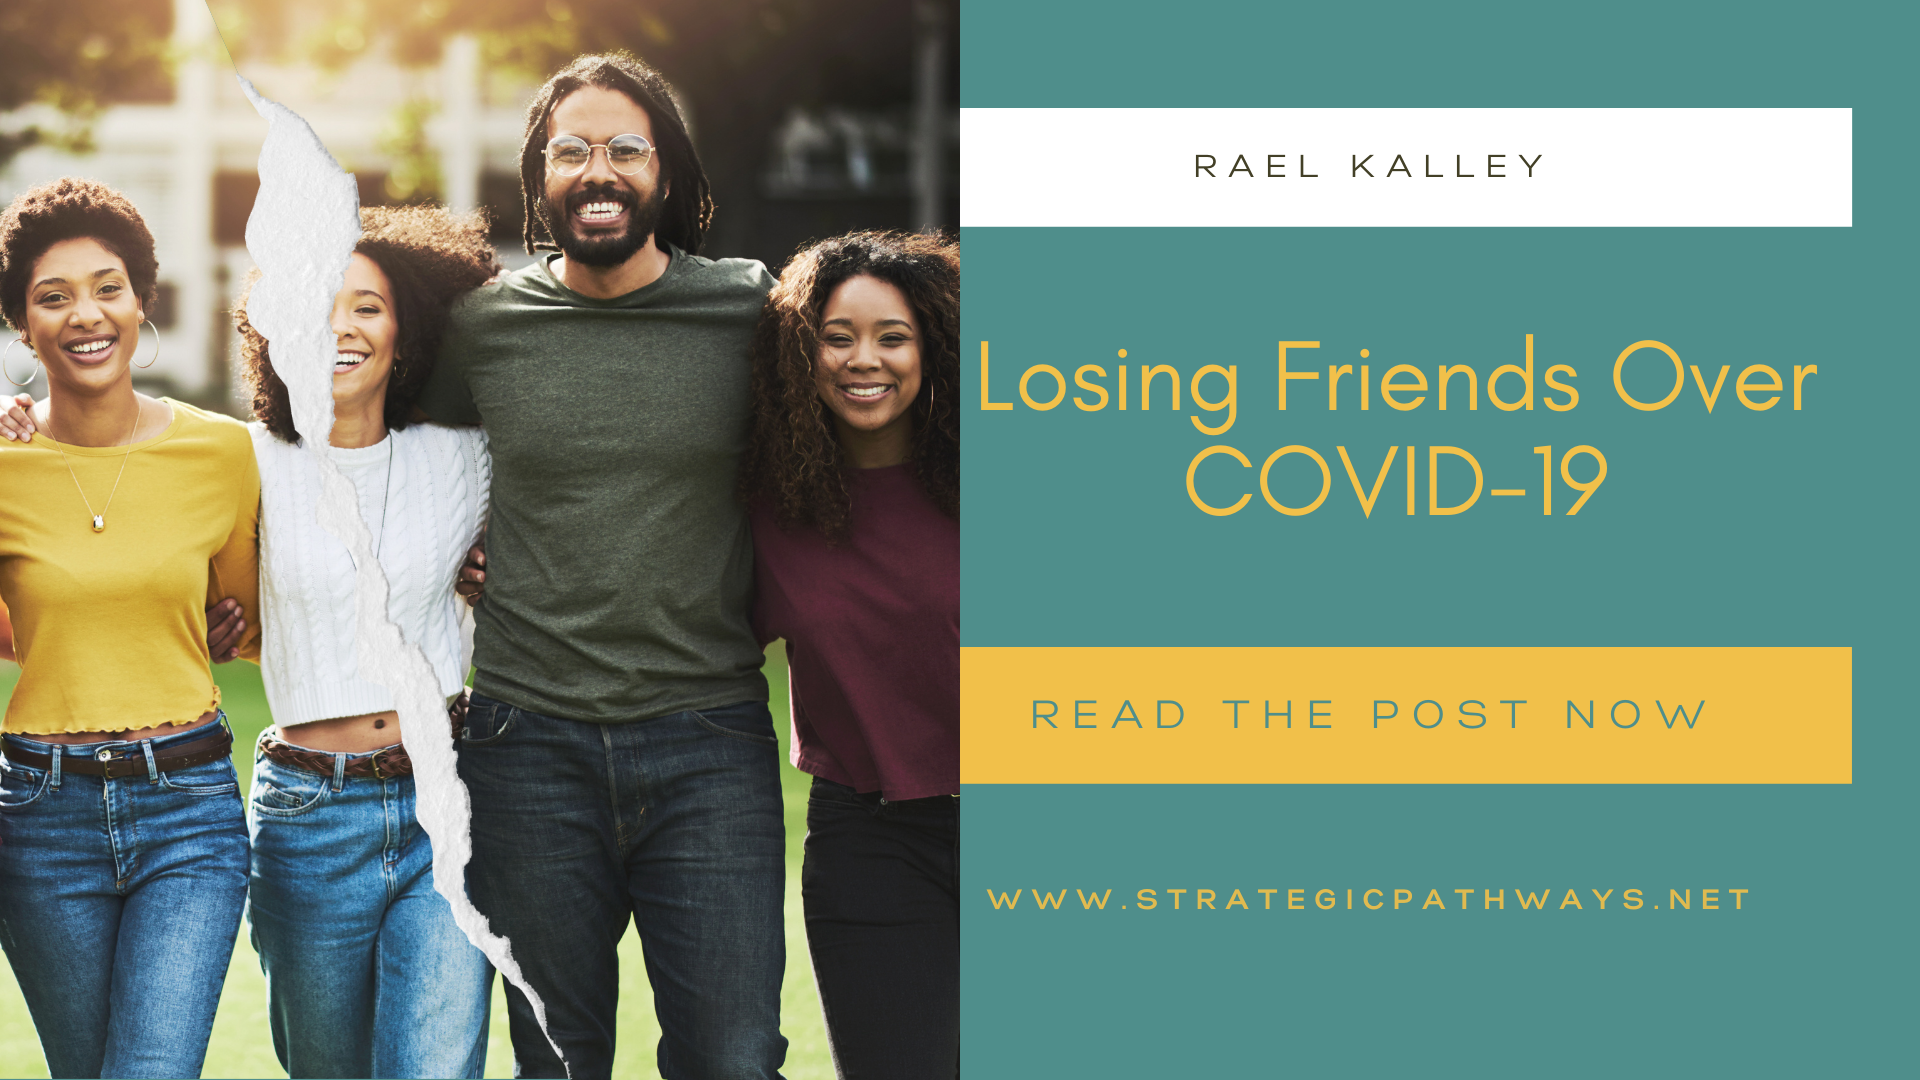 Text says "Losing Friends Over COVID-19Losing Friends Over COVID-19" and image is a torn photo from a group of friends